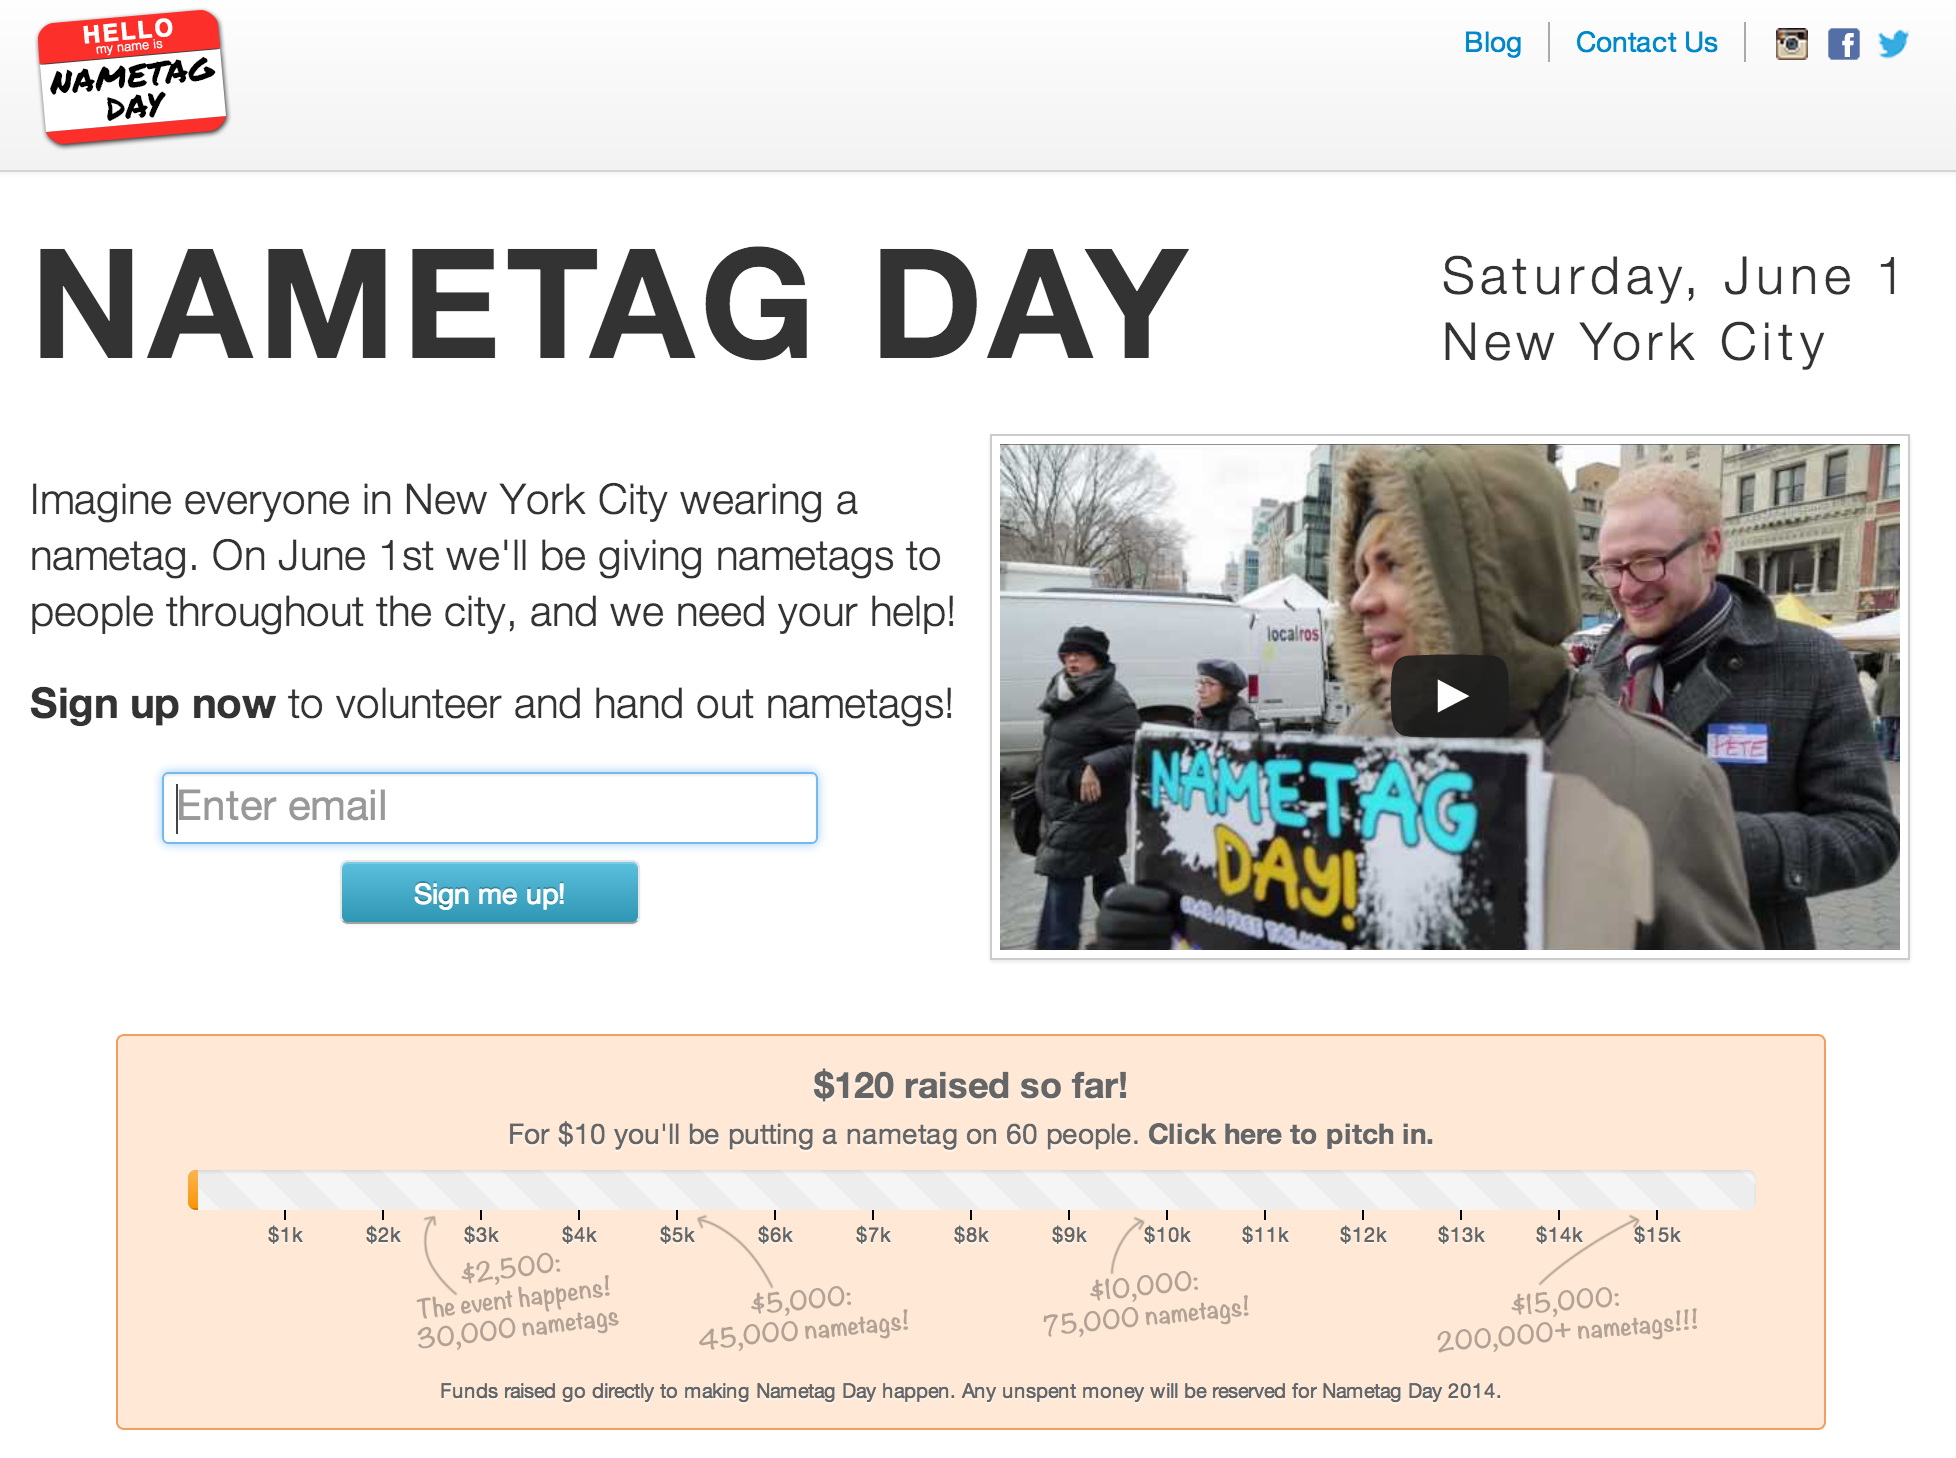 Nametag Day website launches with crowdfunding campaign! Awesome foundation sponsors Nametag Day!